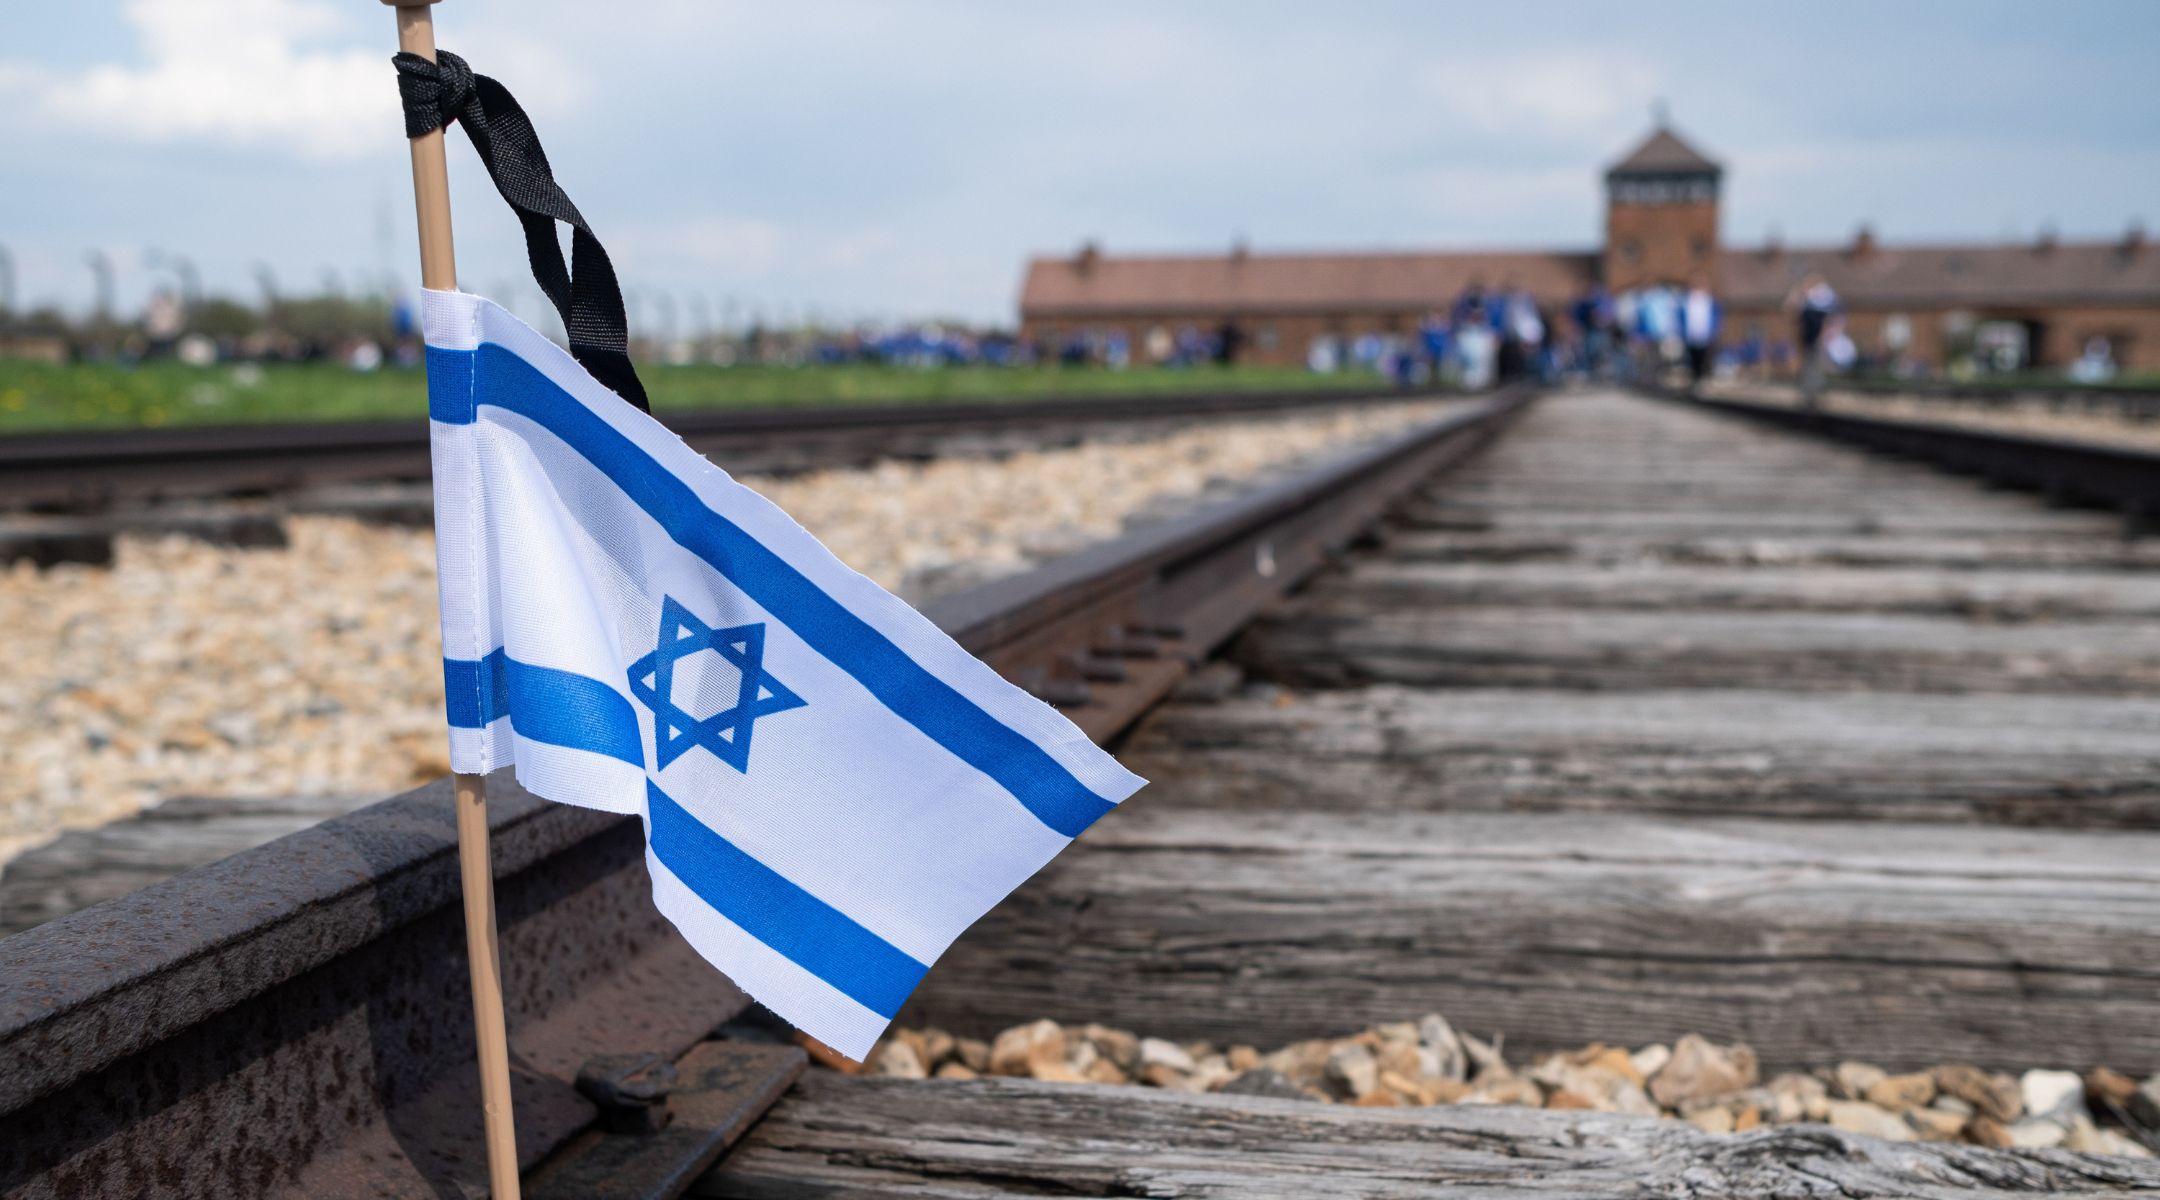 A flag of Israel was seen on the railroad tracks in KL Birkenau during the International March of The Living, April 28, 2022. (Wojciech Grabowski/SOPA Images/LightRocket via Getty Images)